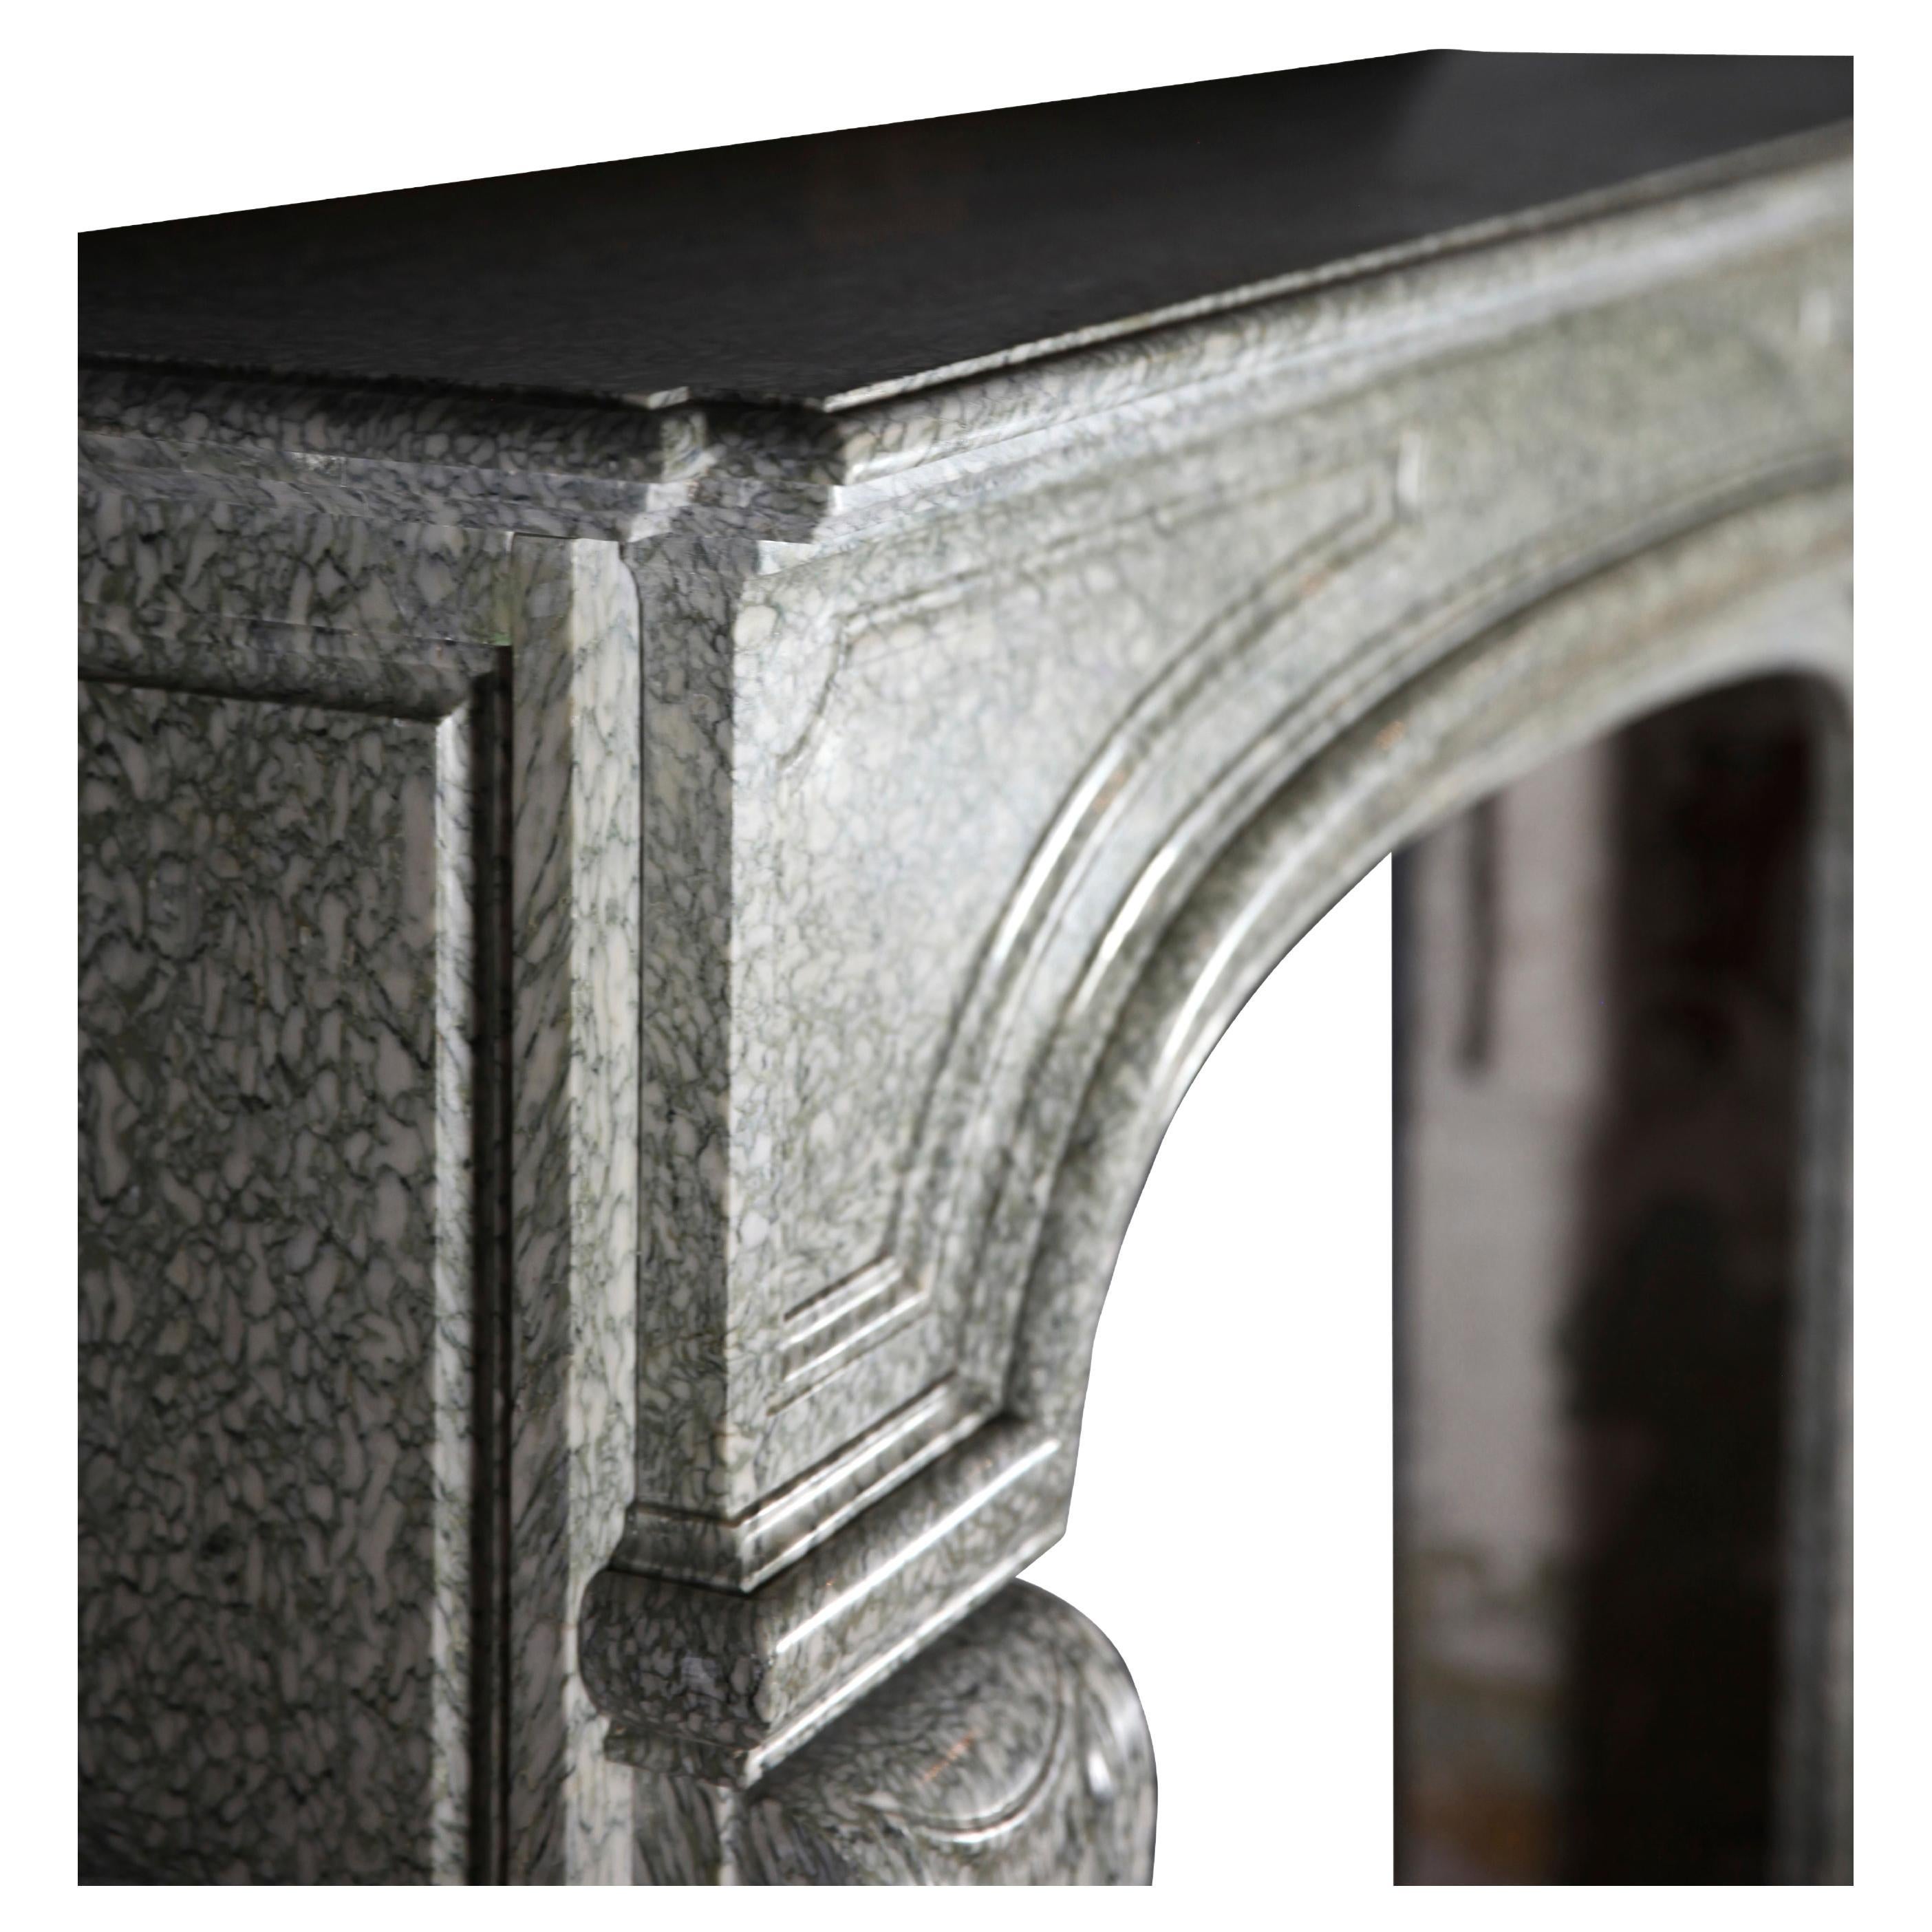 This Campan Vert marble vintage fireplace surround is a Louis XIV style from the 19th century. A typical European style however you will find this marble in lots of historical landmarks in the USA.
Measures:
165 cm Exterior Width 64,96 Inch
119 cm